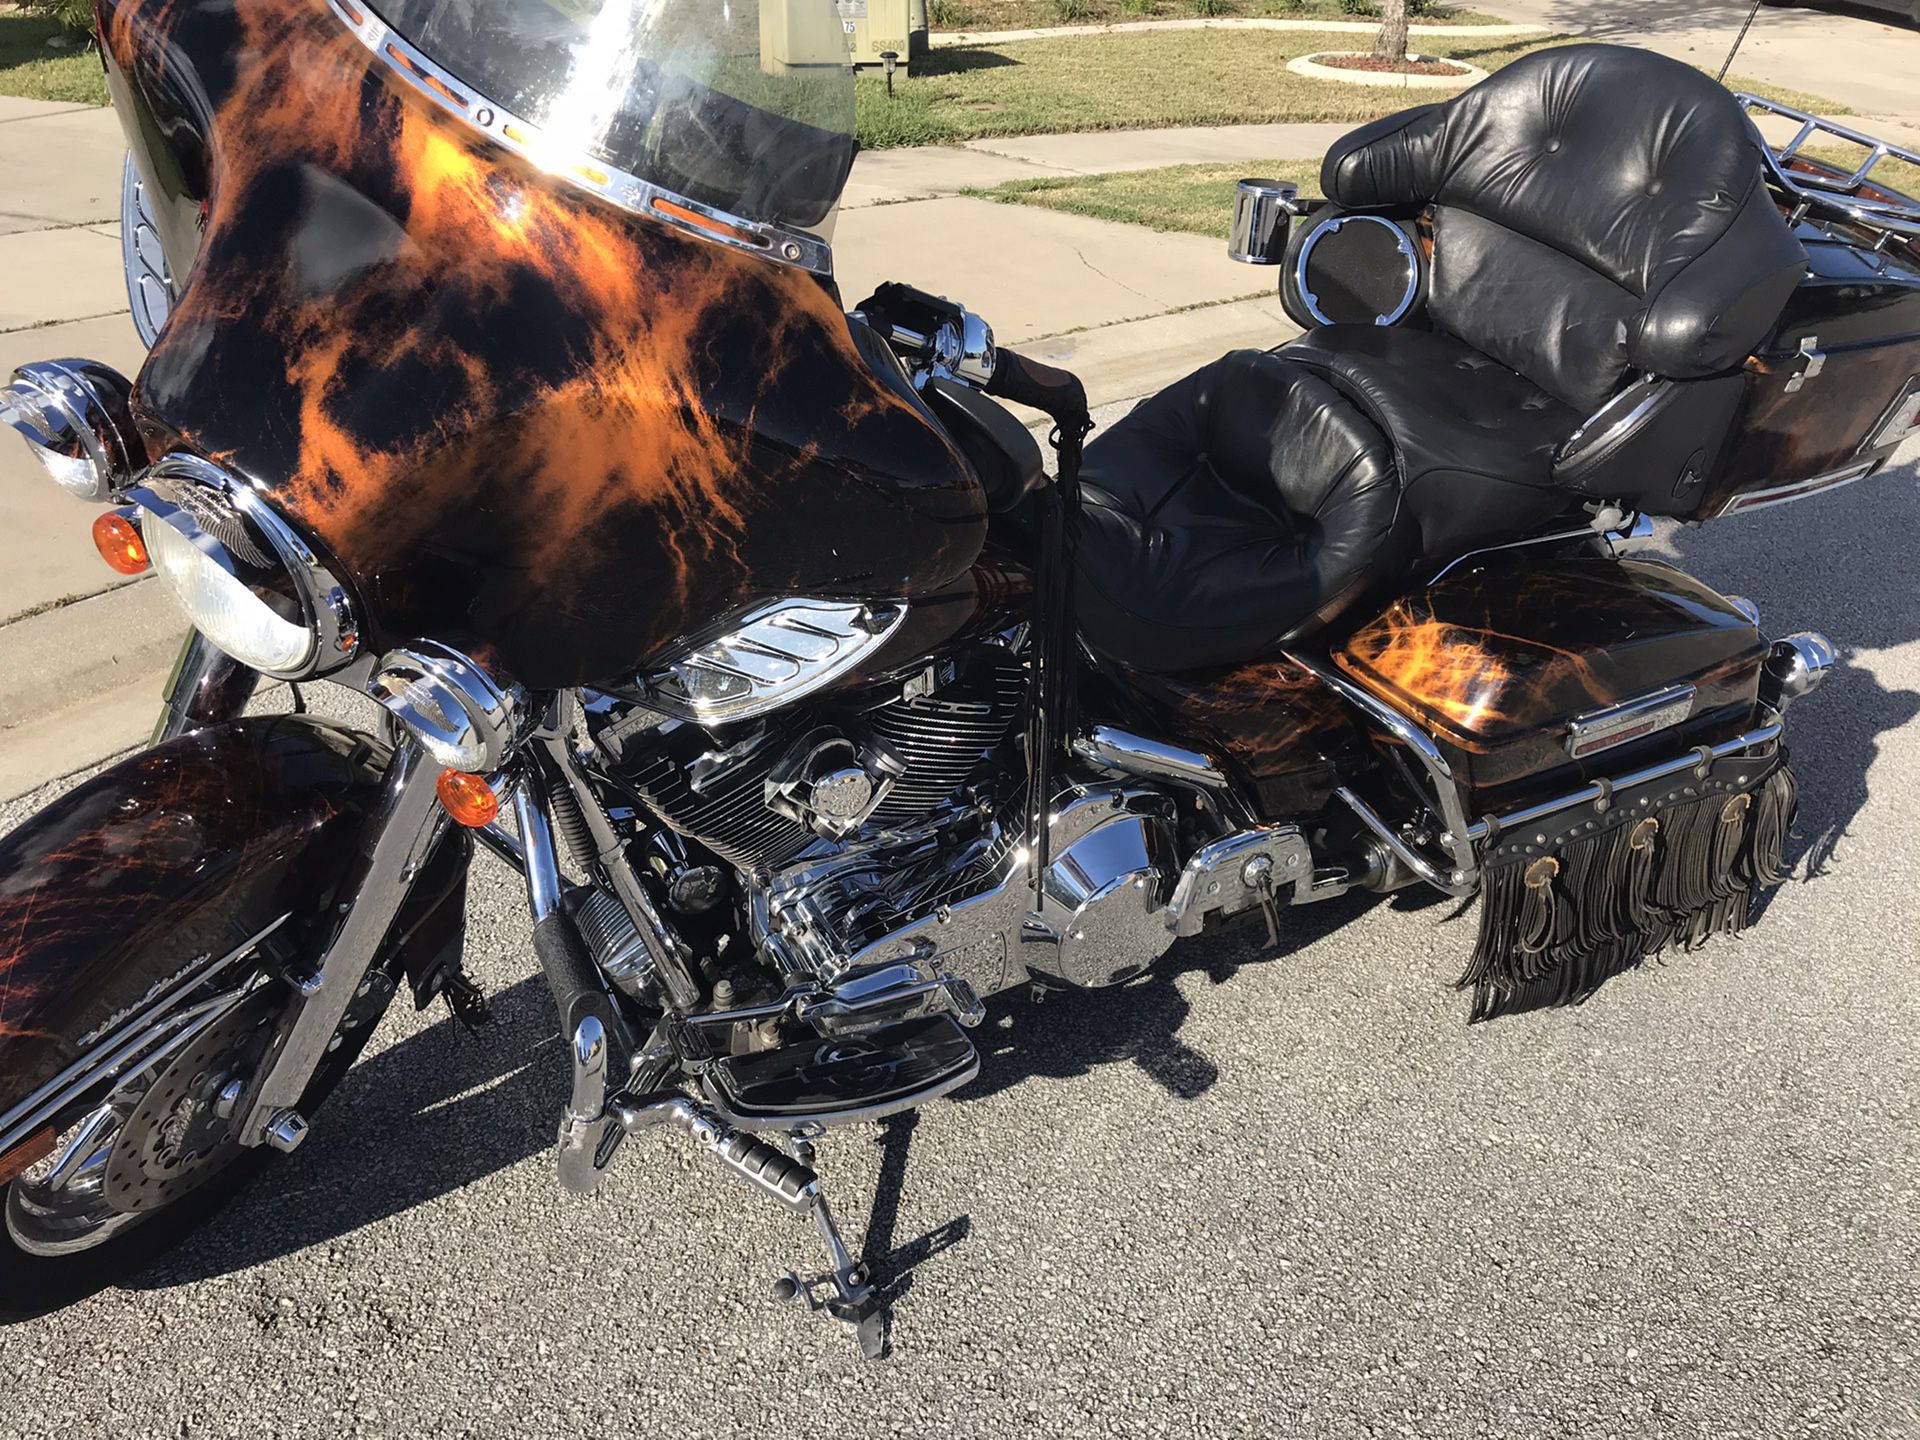 2001 Harley Davidson ultra HD in great shape one of extras